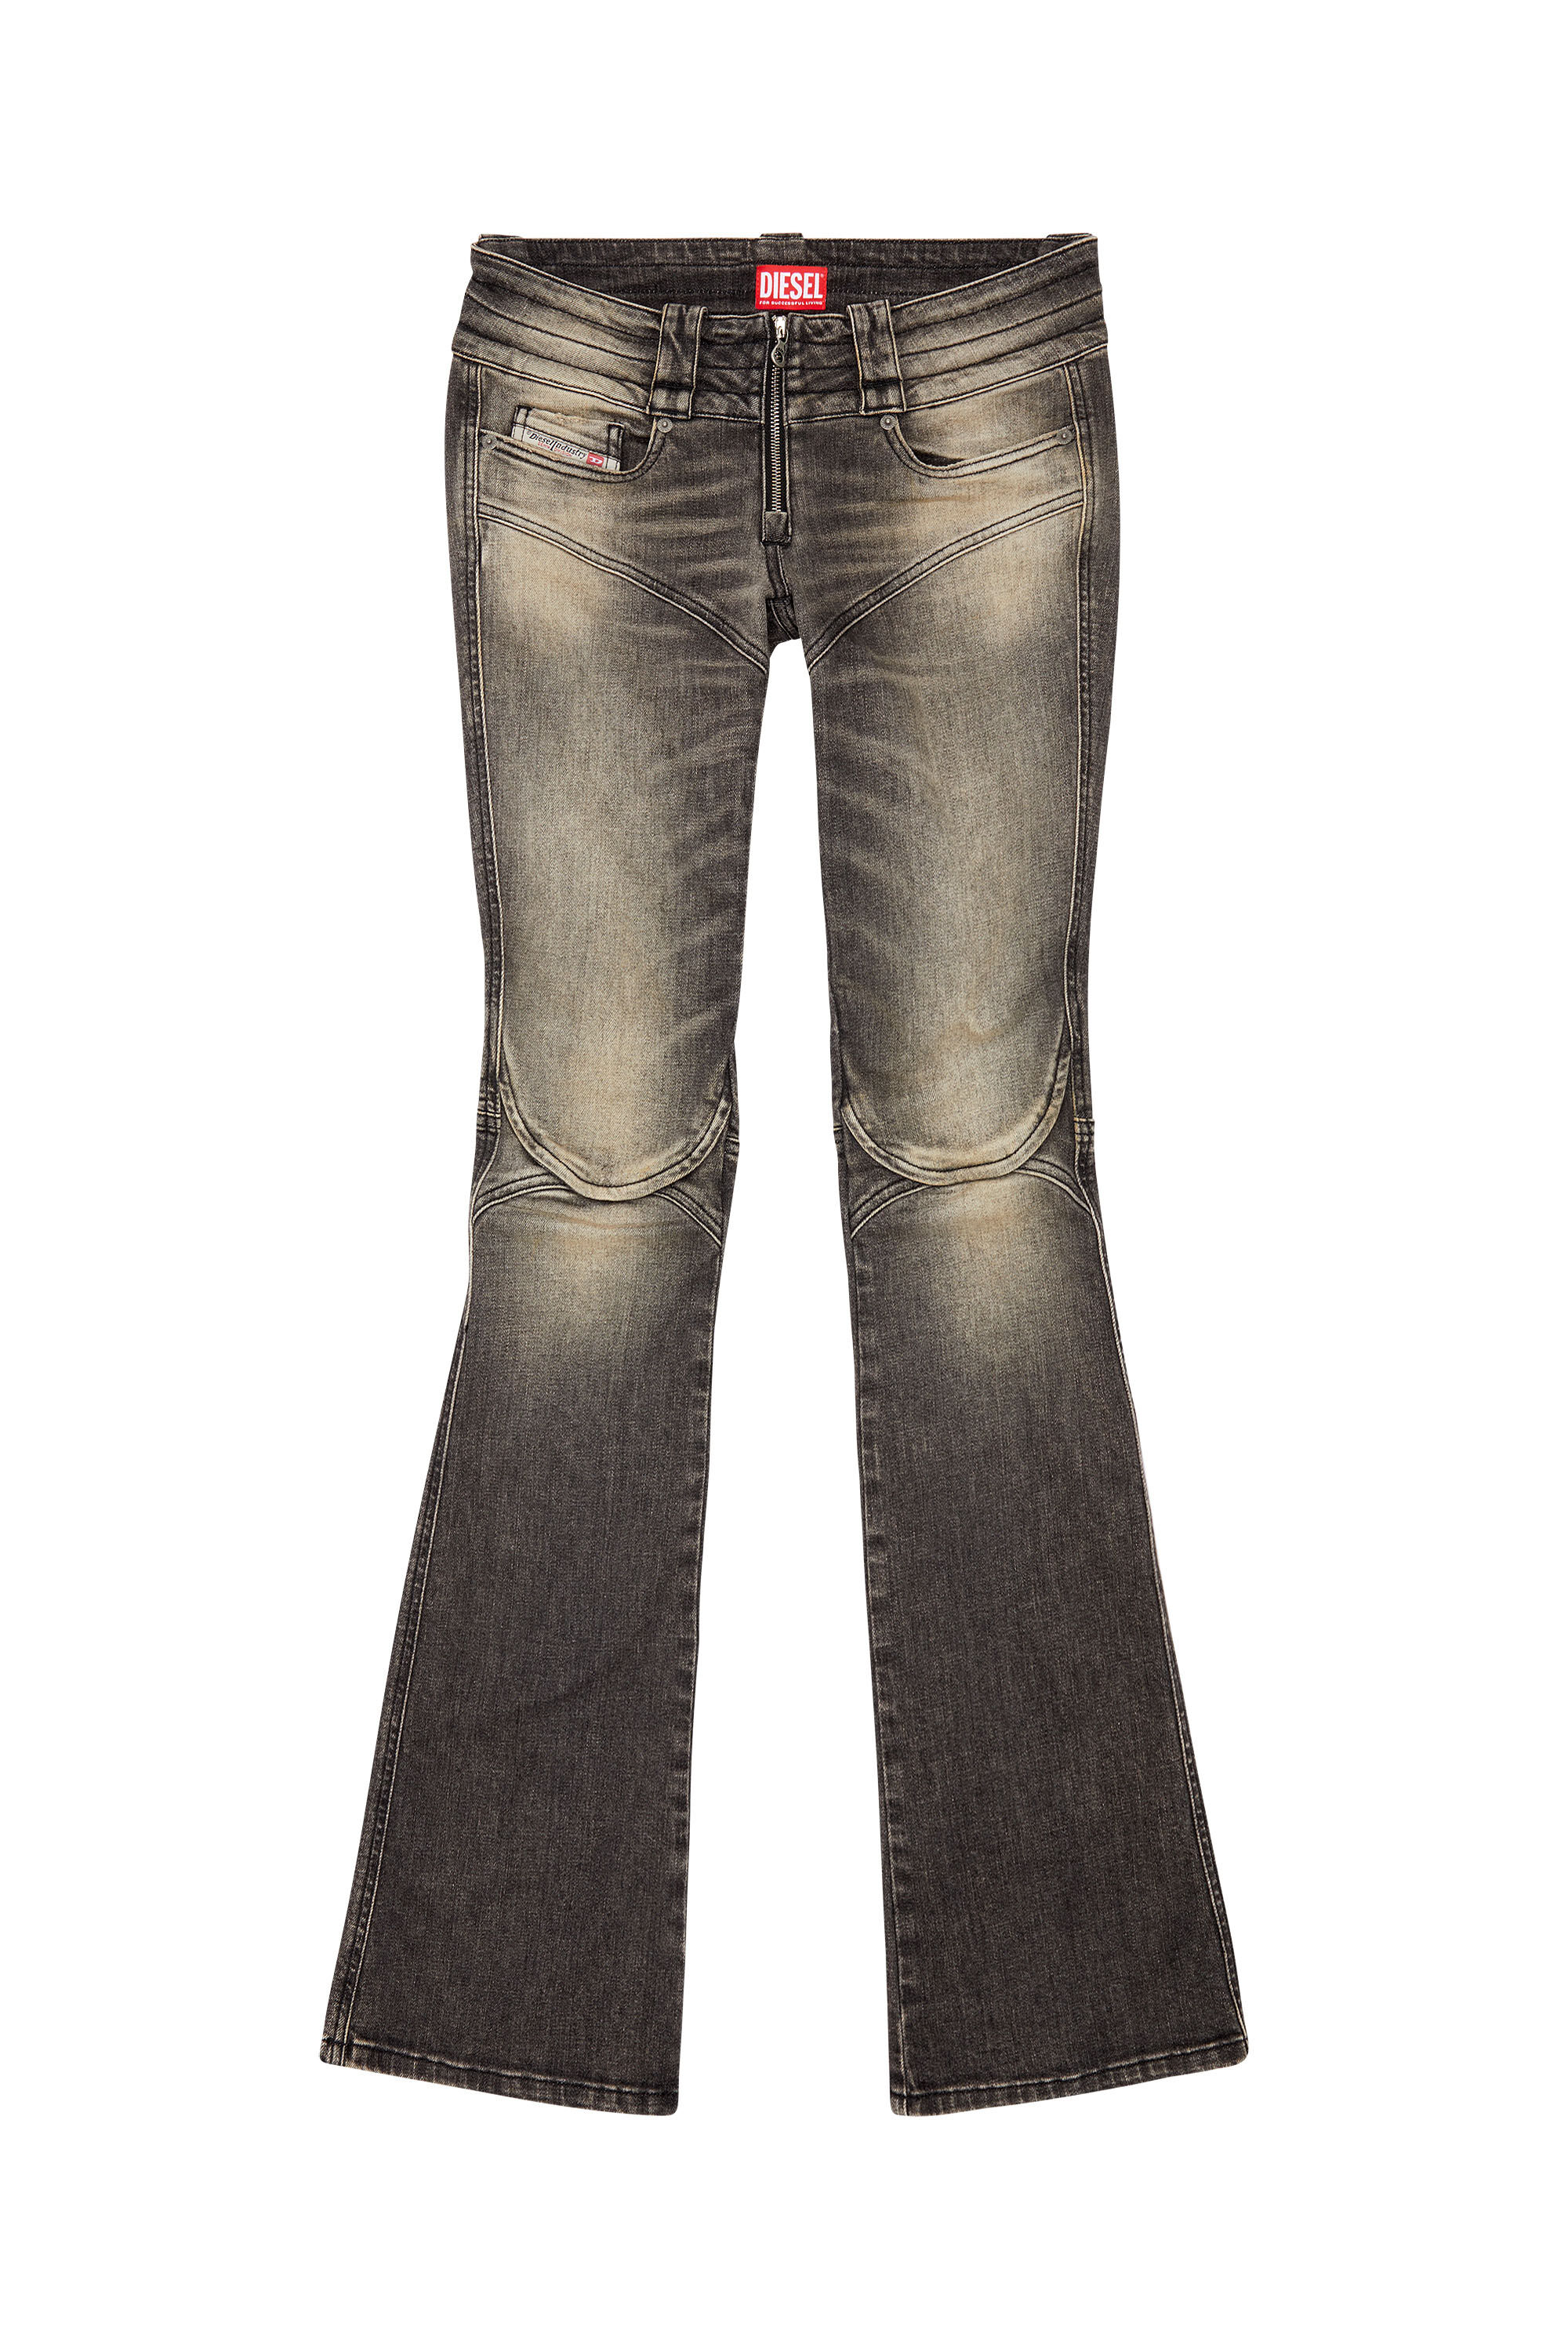 Women's Bootcut and Flare Jeans, Dark grey